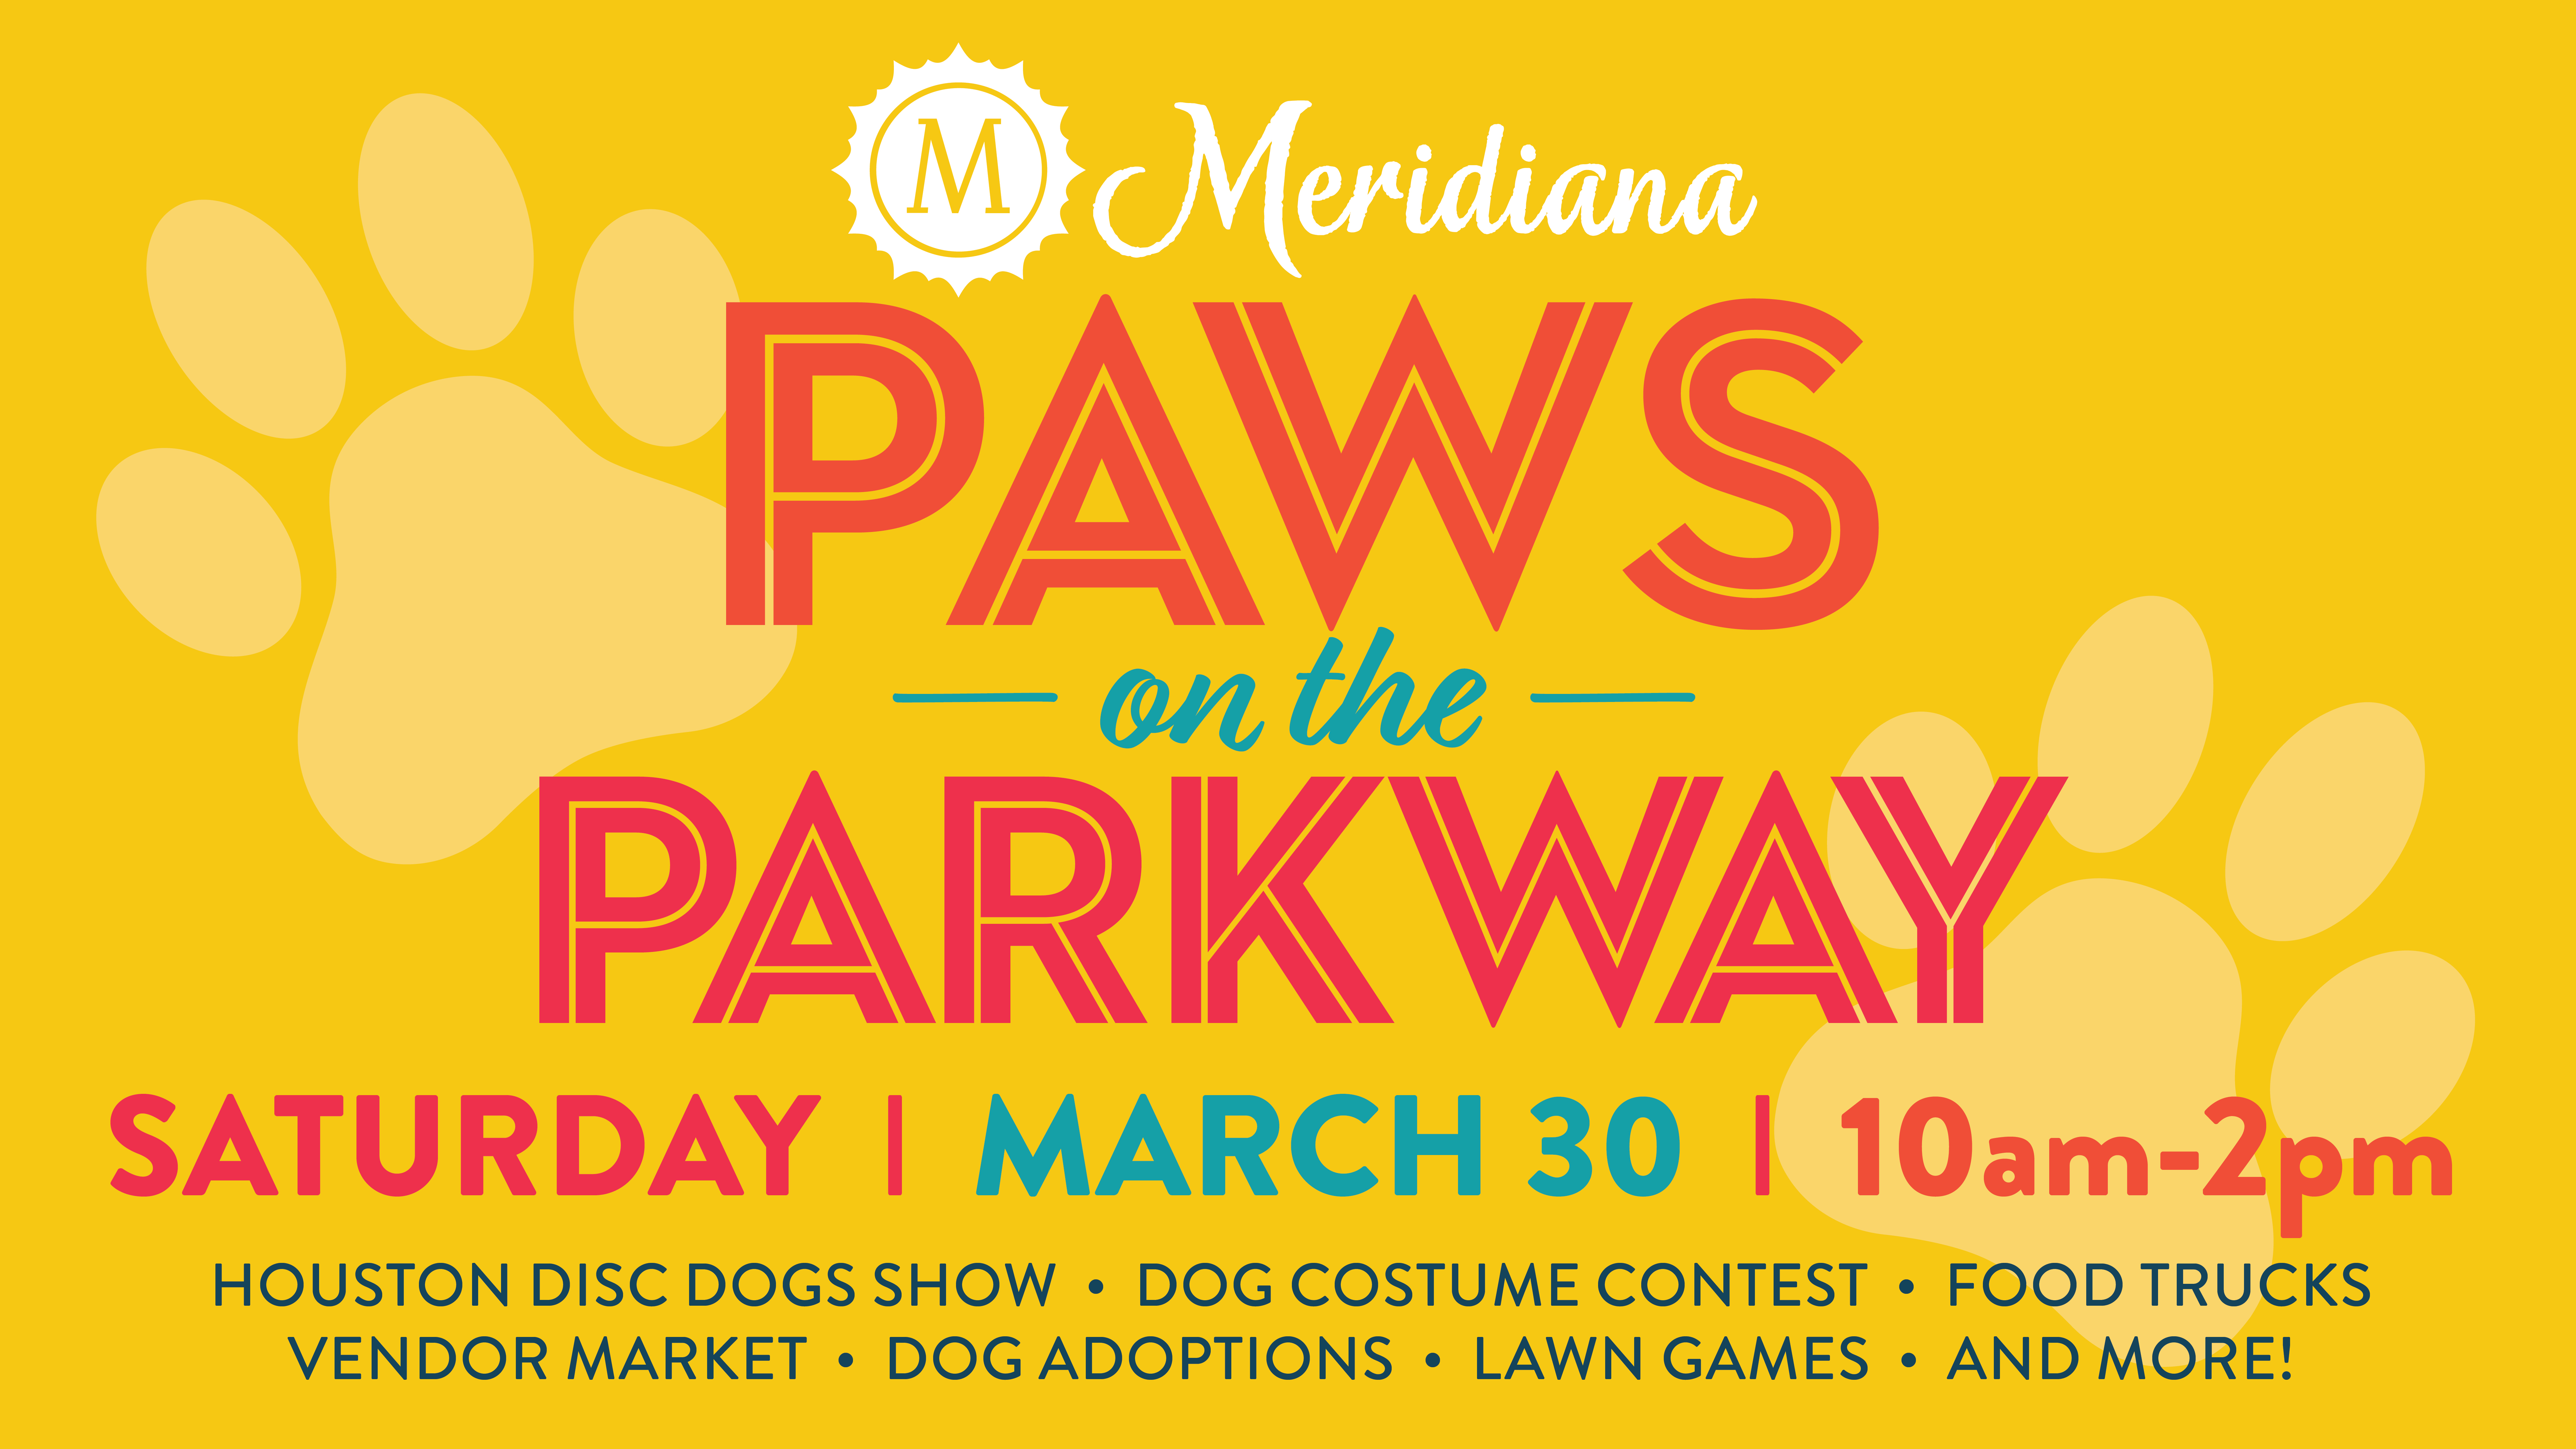 Paws on the Parkway Returns to Meridiana Saturday, March 30